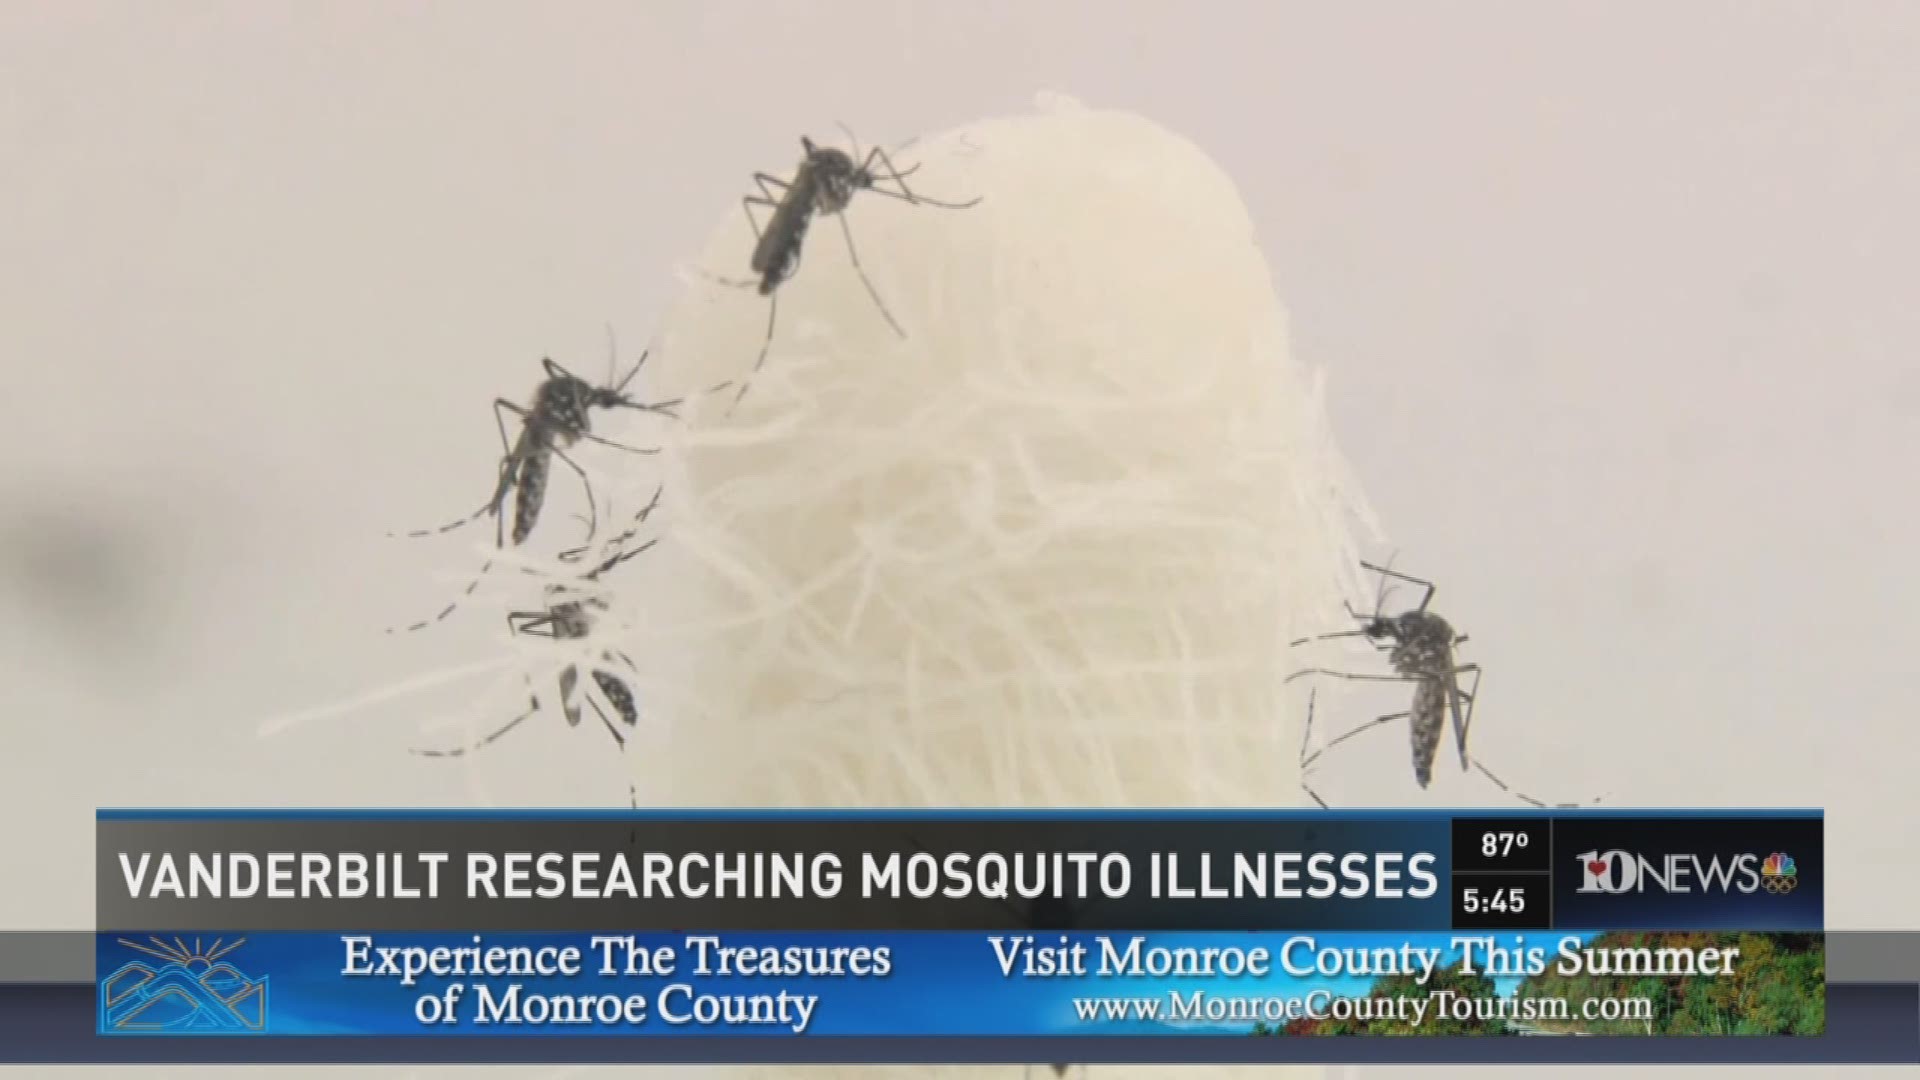 Scientists at Vanderbilt University are researching mosquito behavior so they can develop tools to more effectively keep the bugs from biting.